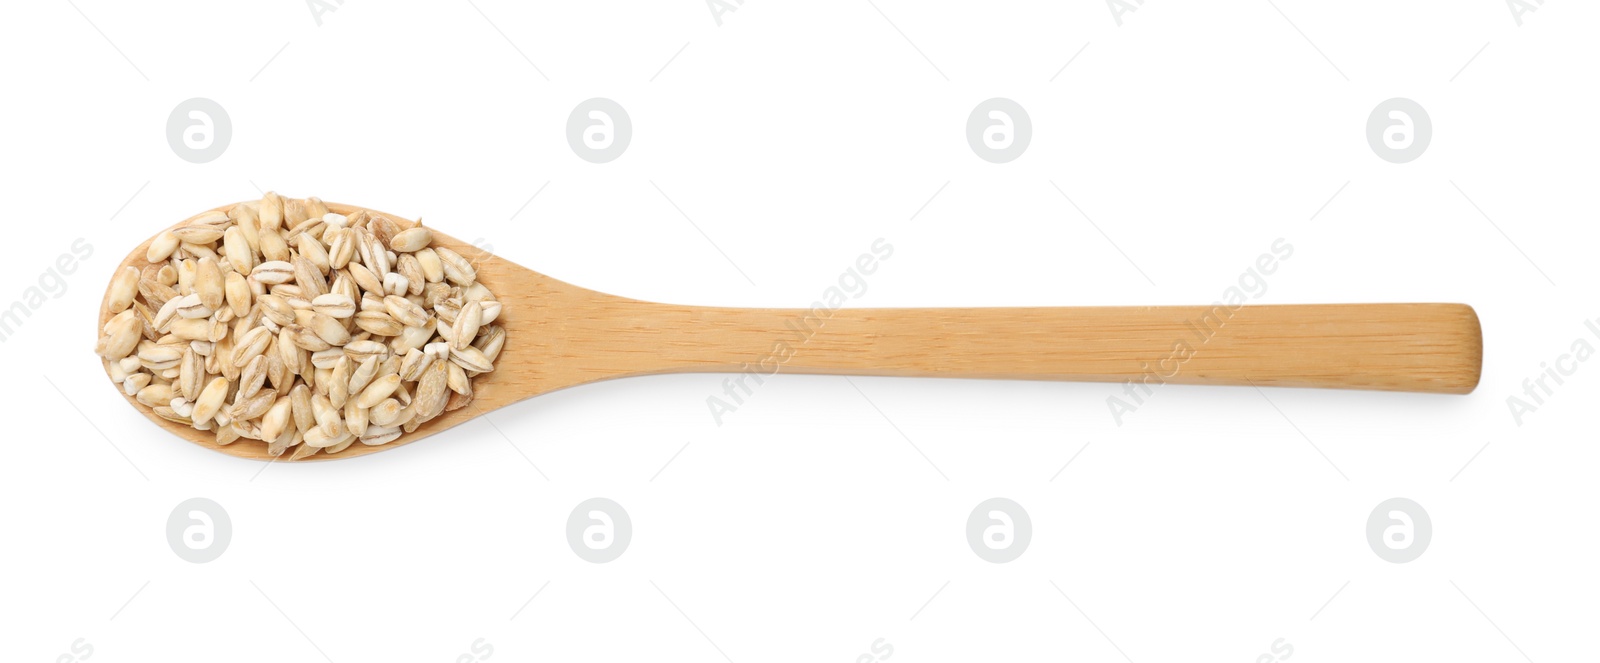 Photo of Wooden spoon with raw pearl barley isolated on white, top view